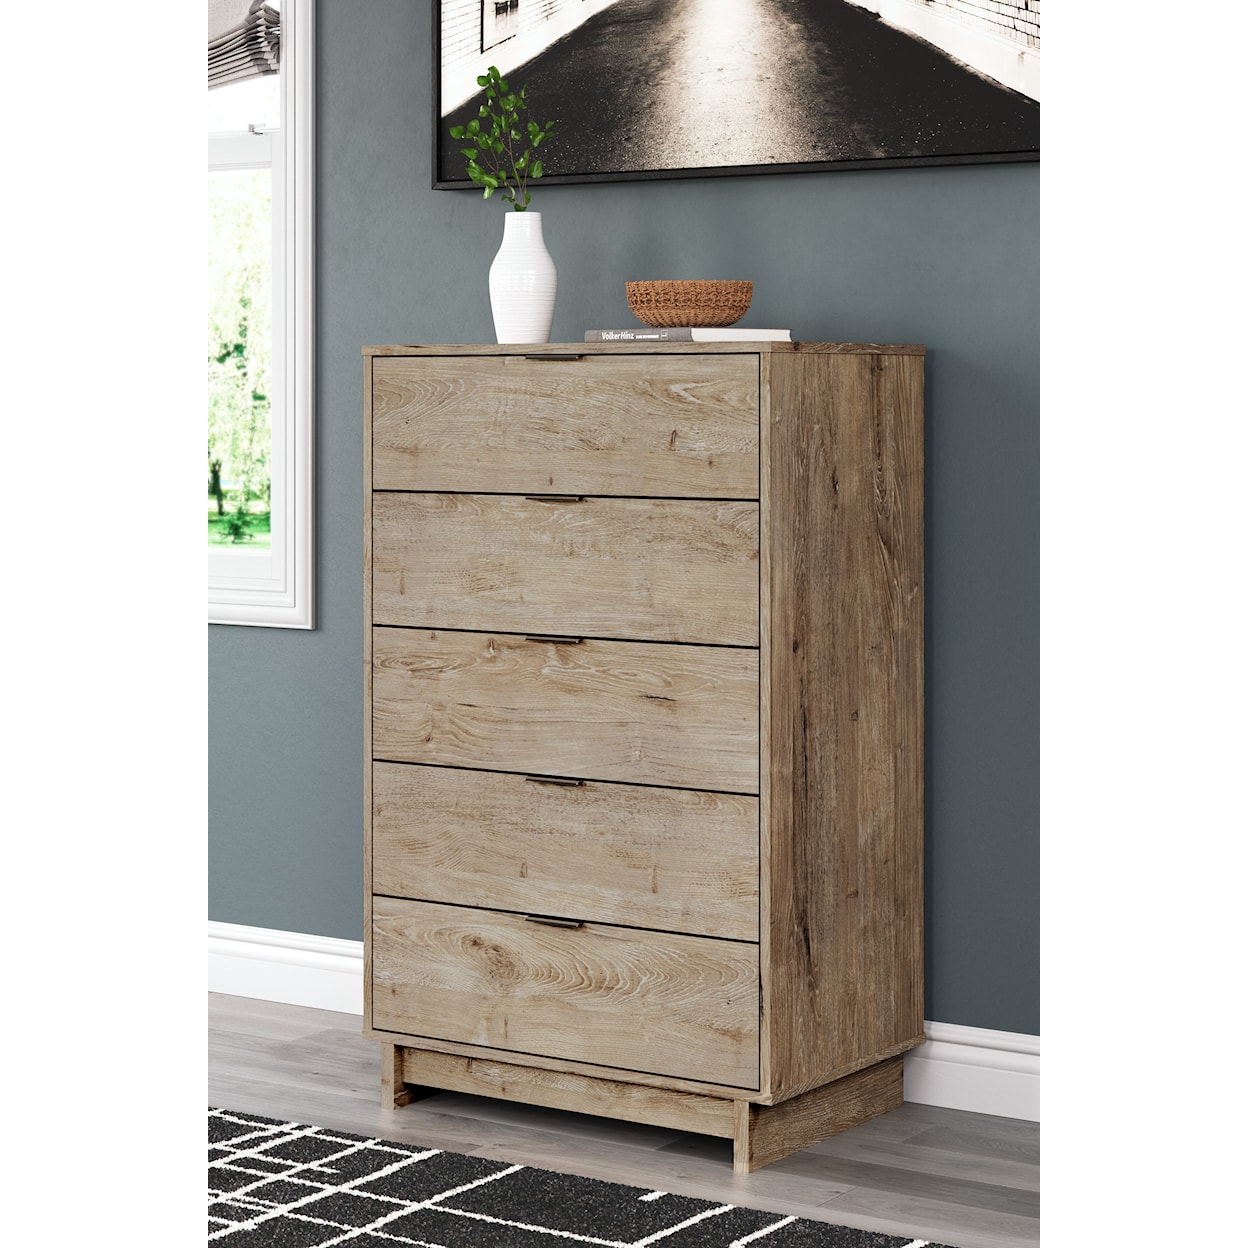 Michael Alan Select Oliah Chest of Drawers